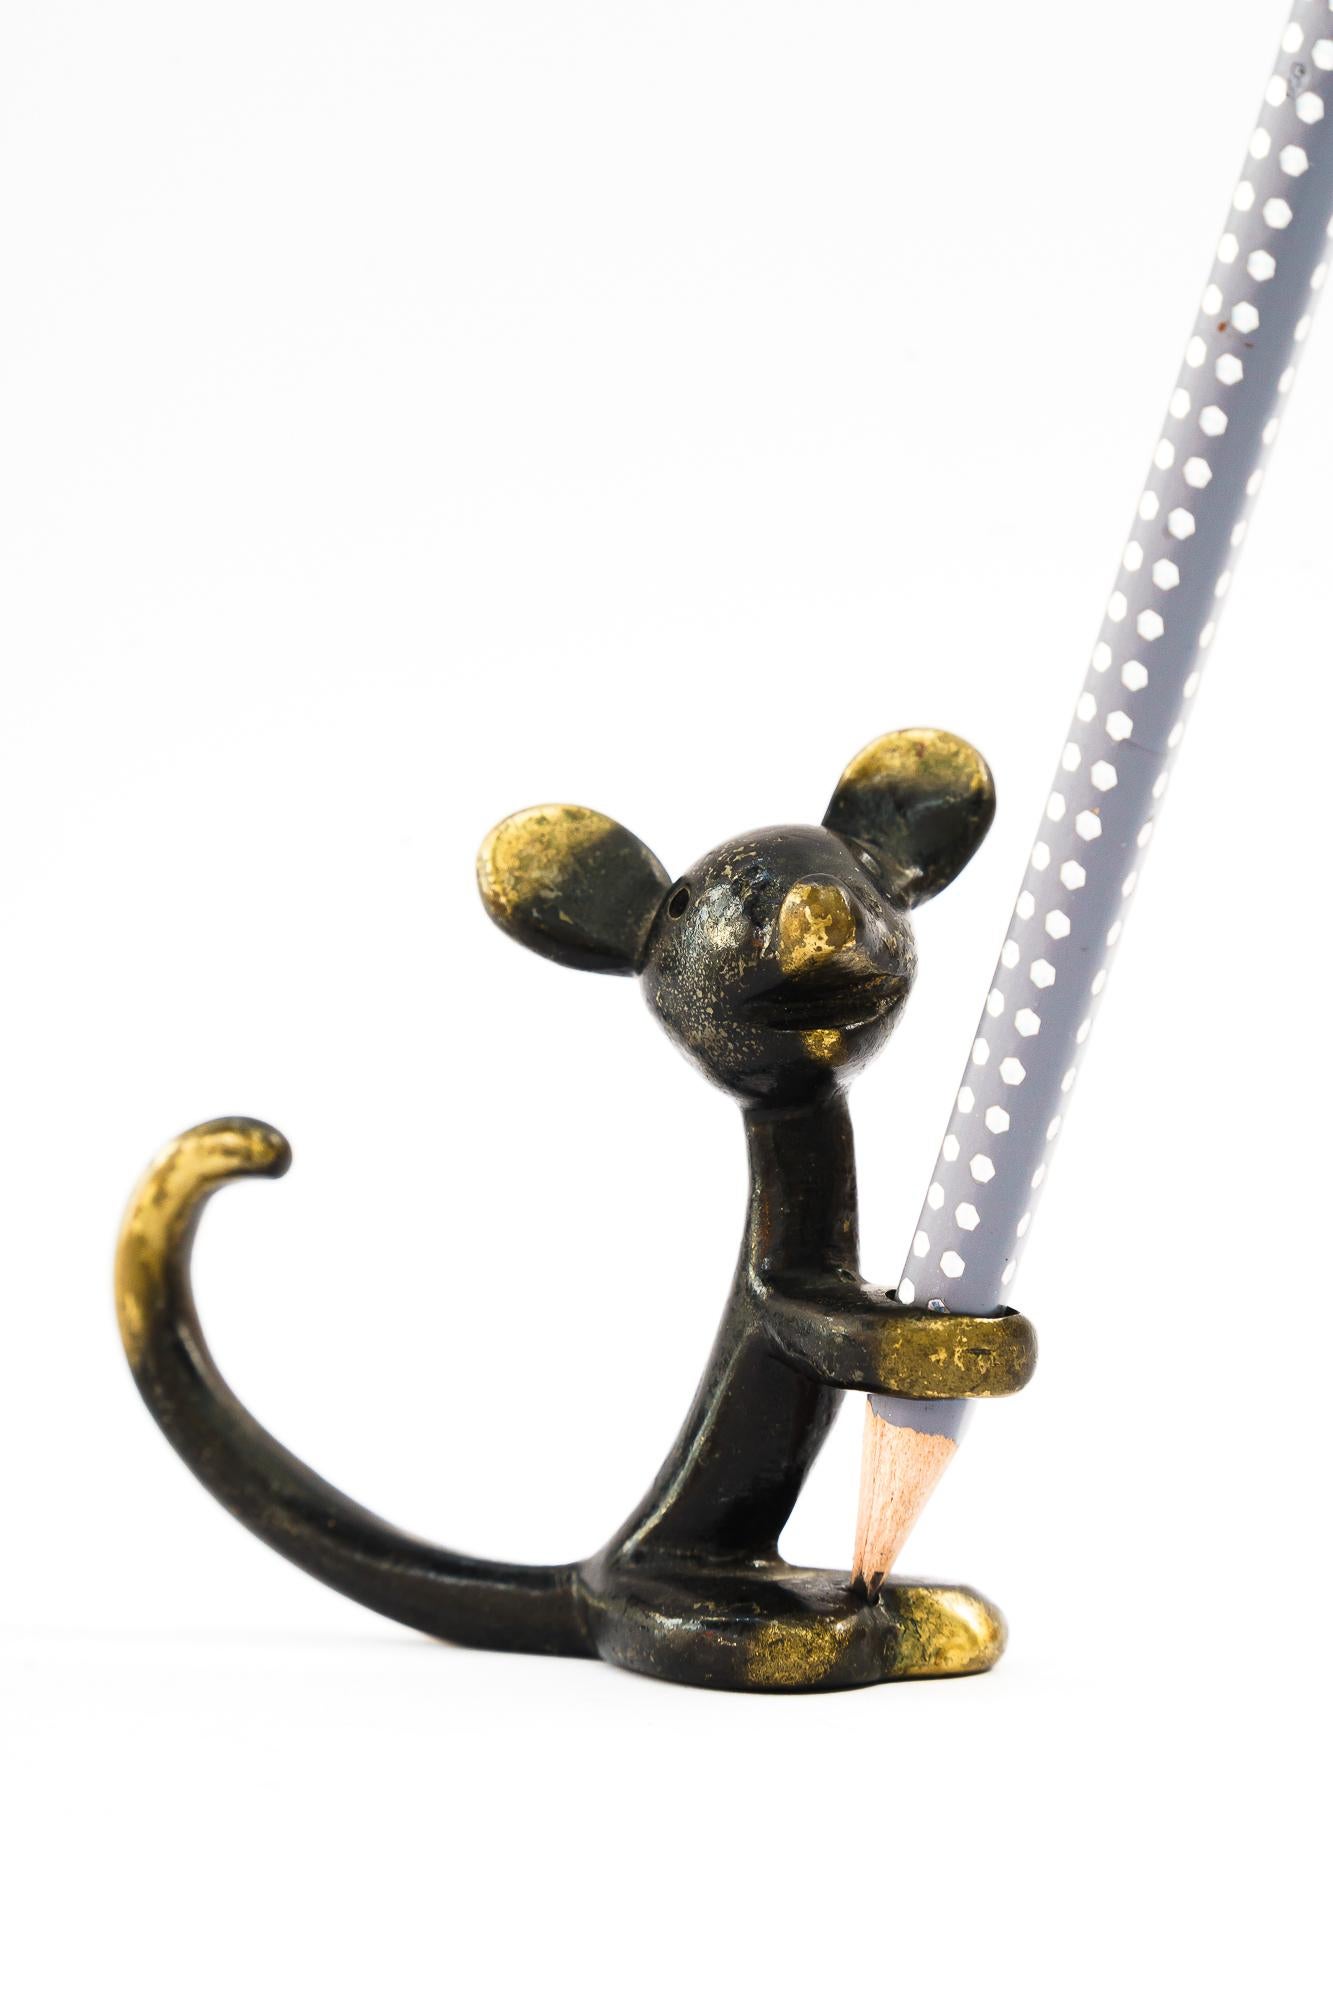 Austrian Pen holder by walter bosse shows a mouse around 1950s For Sale